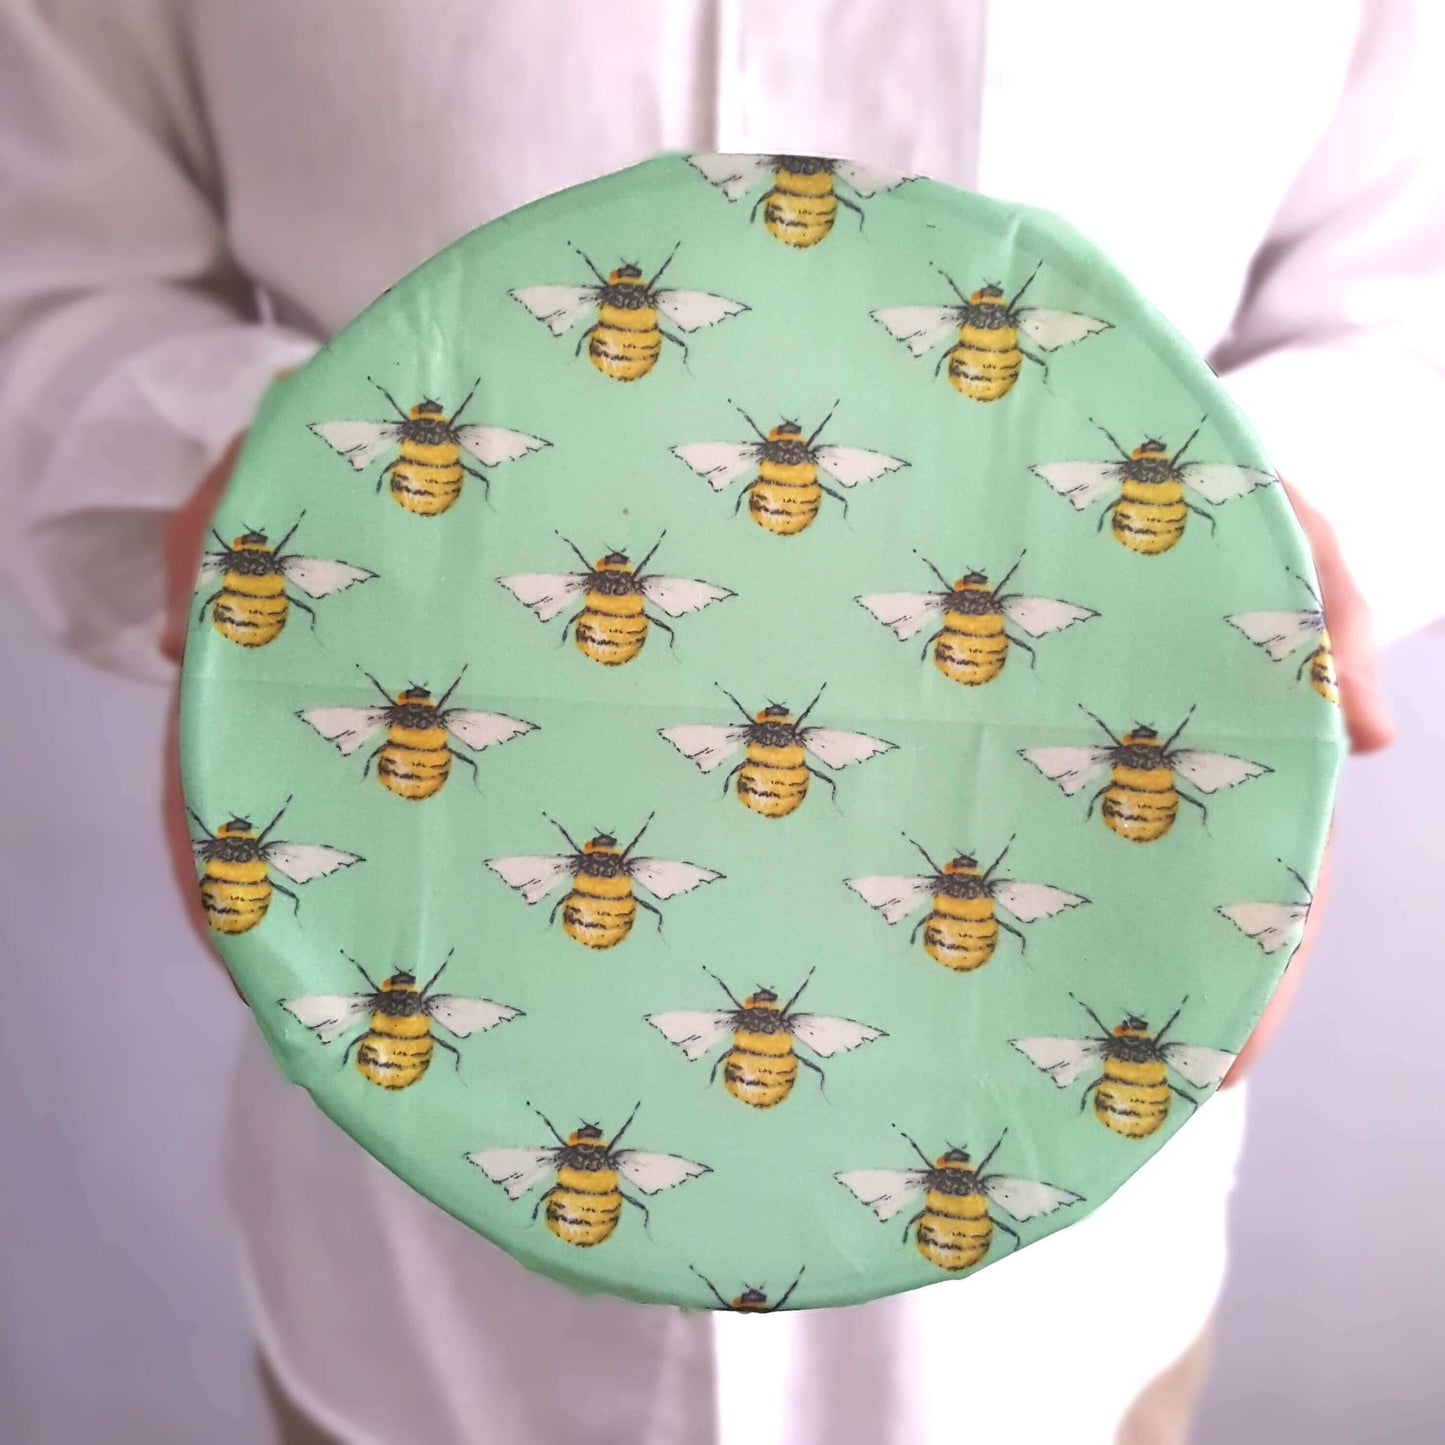 Reusable Beeswax Food Wraps 100% Hand Made in the UK by Honey Bee Good shown in Set of 3 Classic Penguins, Hens & Bees on bowl